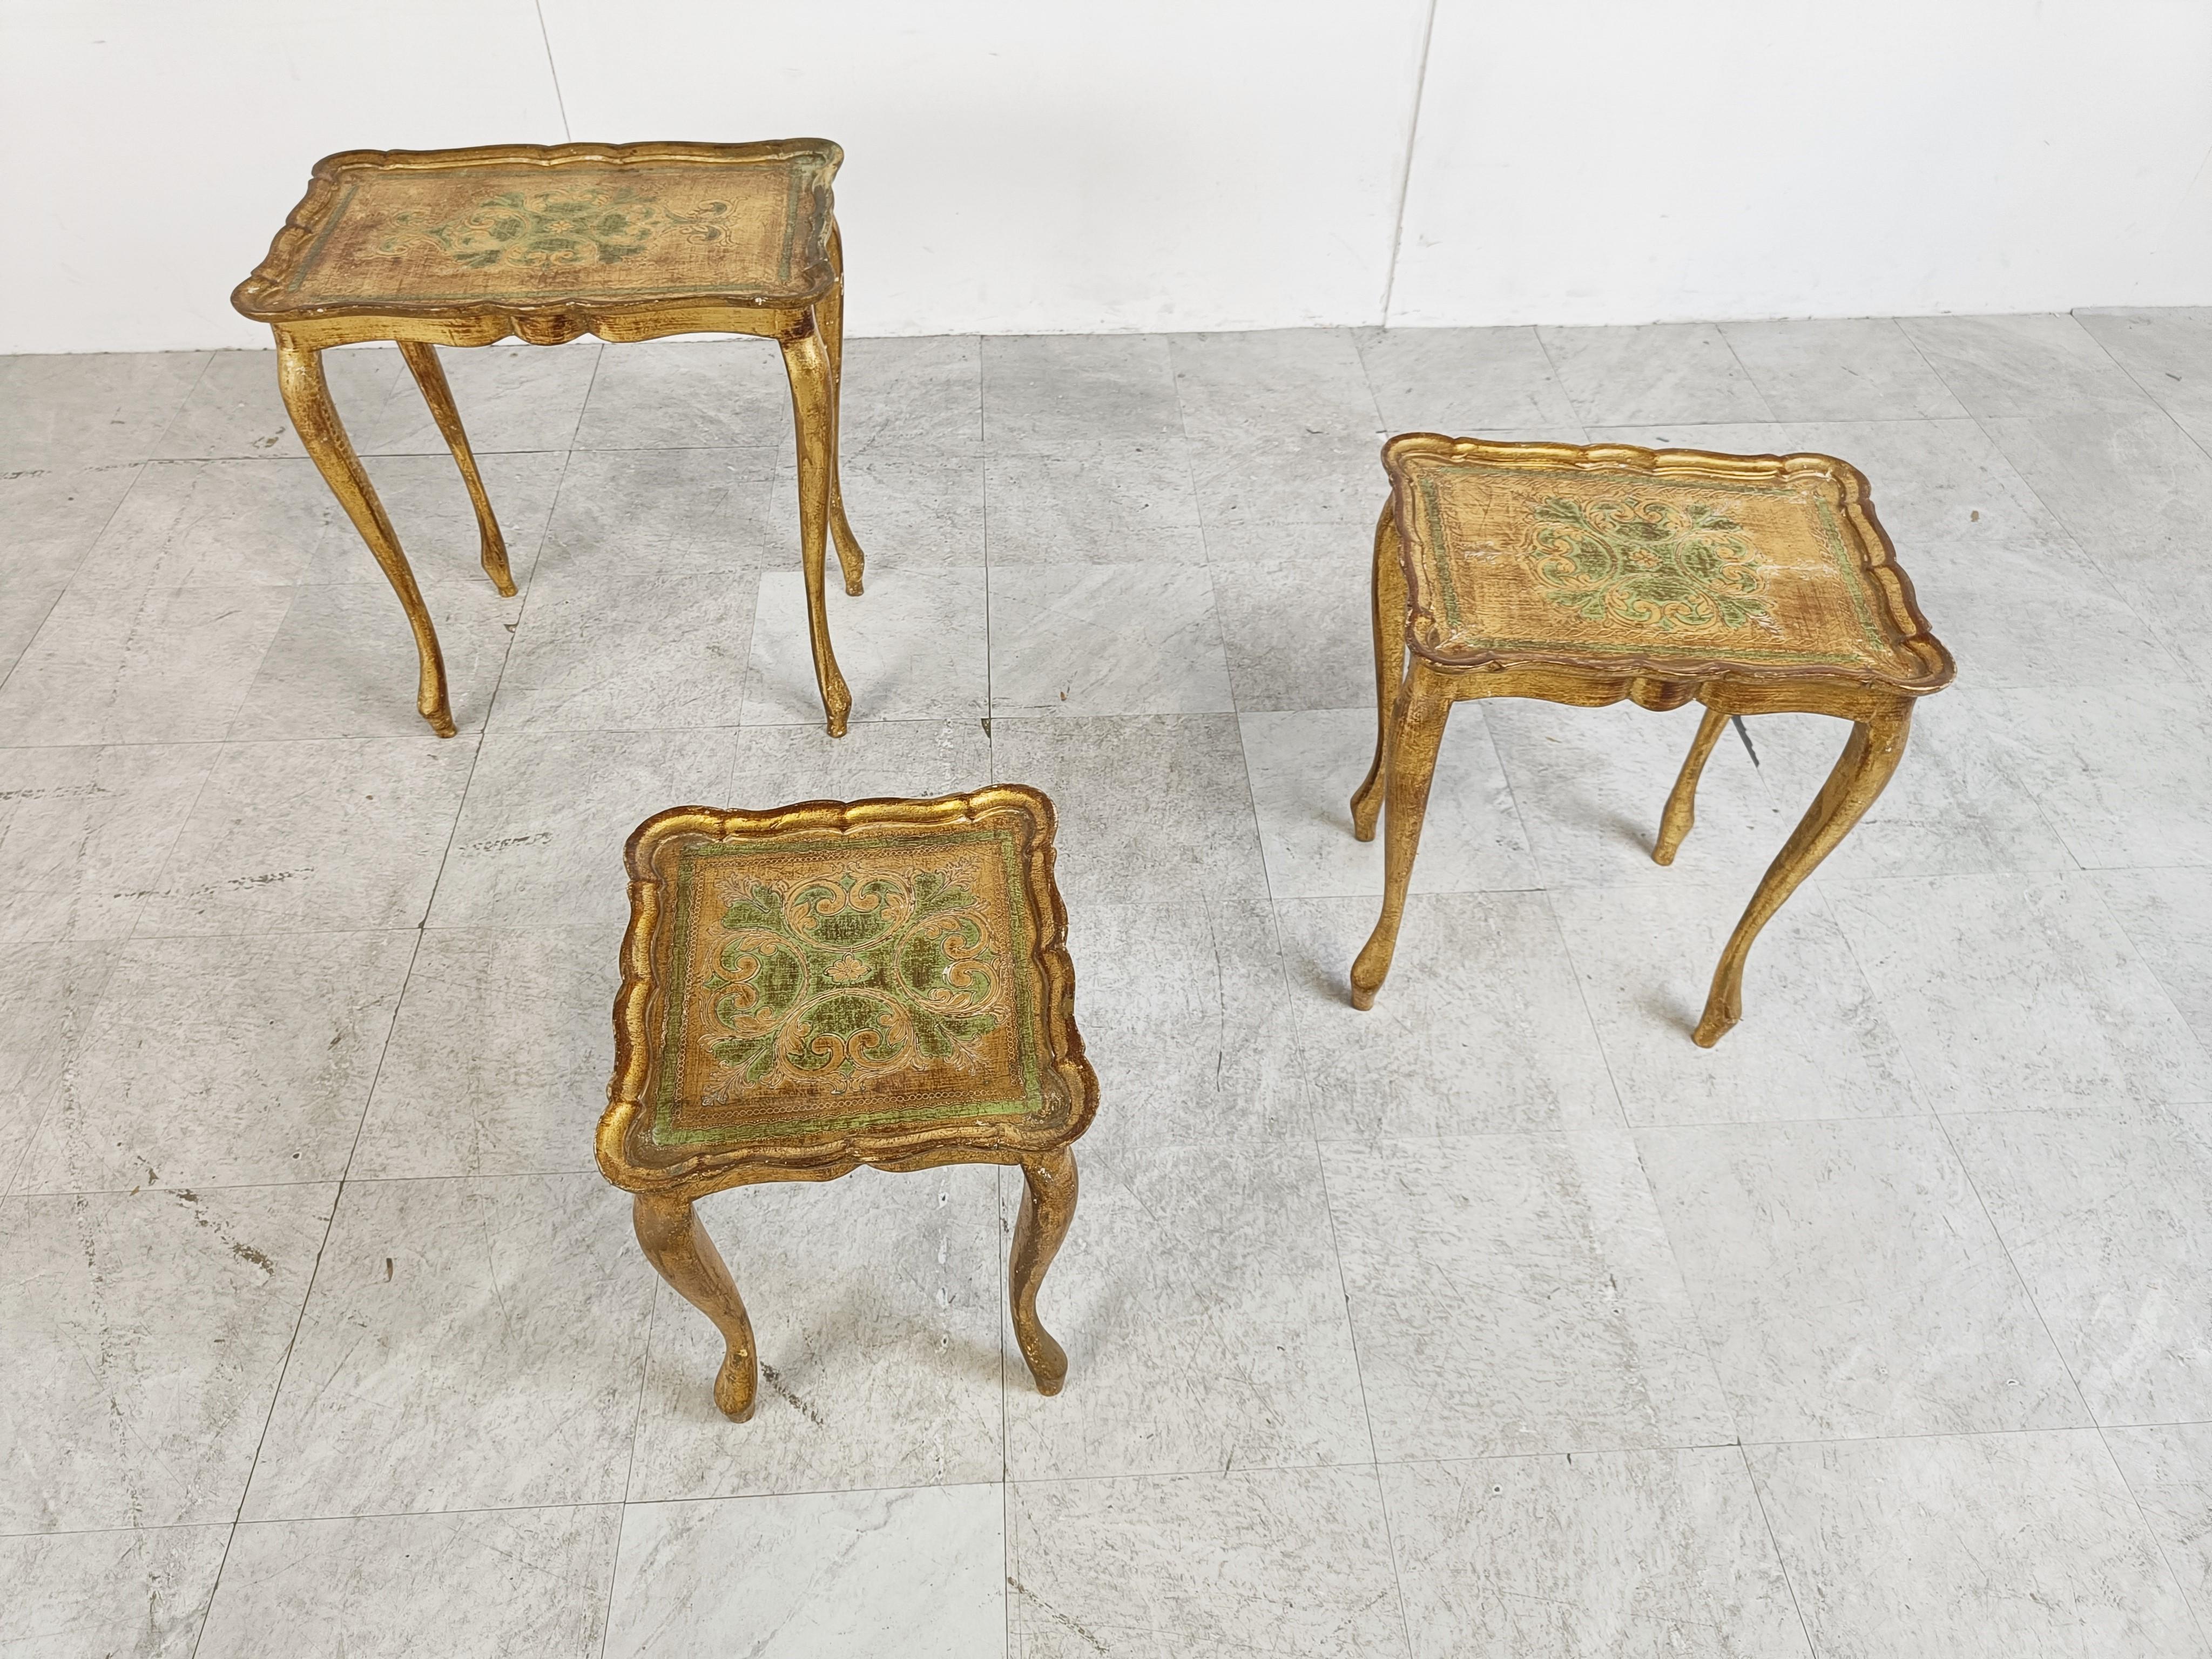 Lovely set of Italian gilt wood nesting tables with florentine decors.

Beautifully shaped legs.

Labeled

Nice patina. 

1920s - italy, Firenze

Dimensions of the largest table:

Height: 55cm/21.65